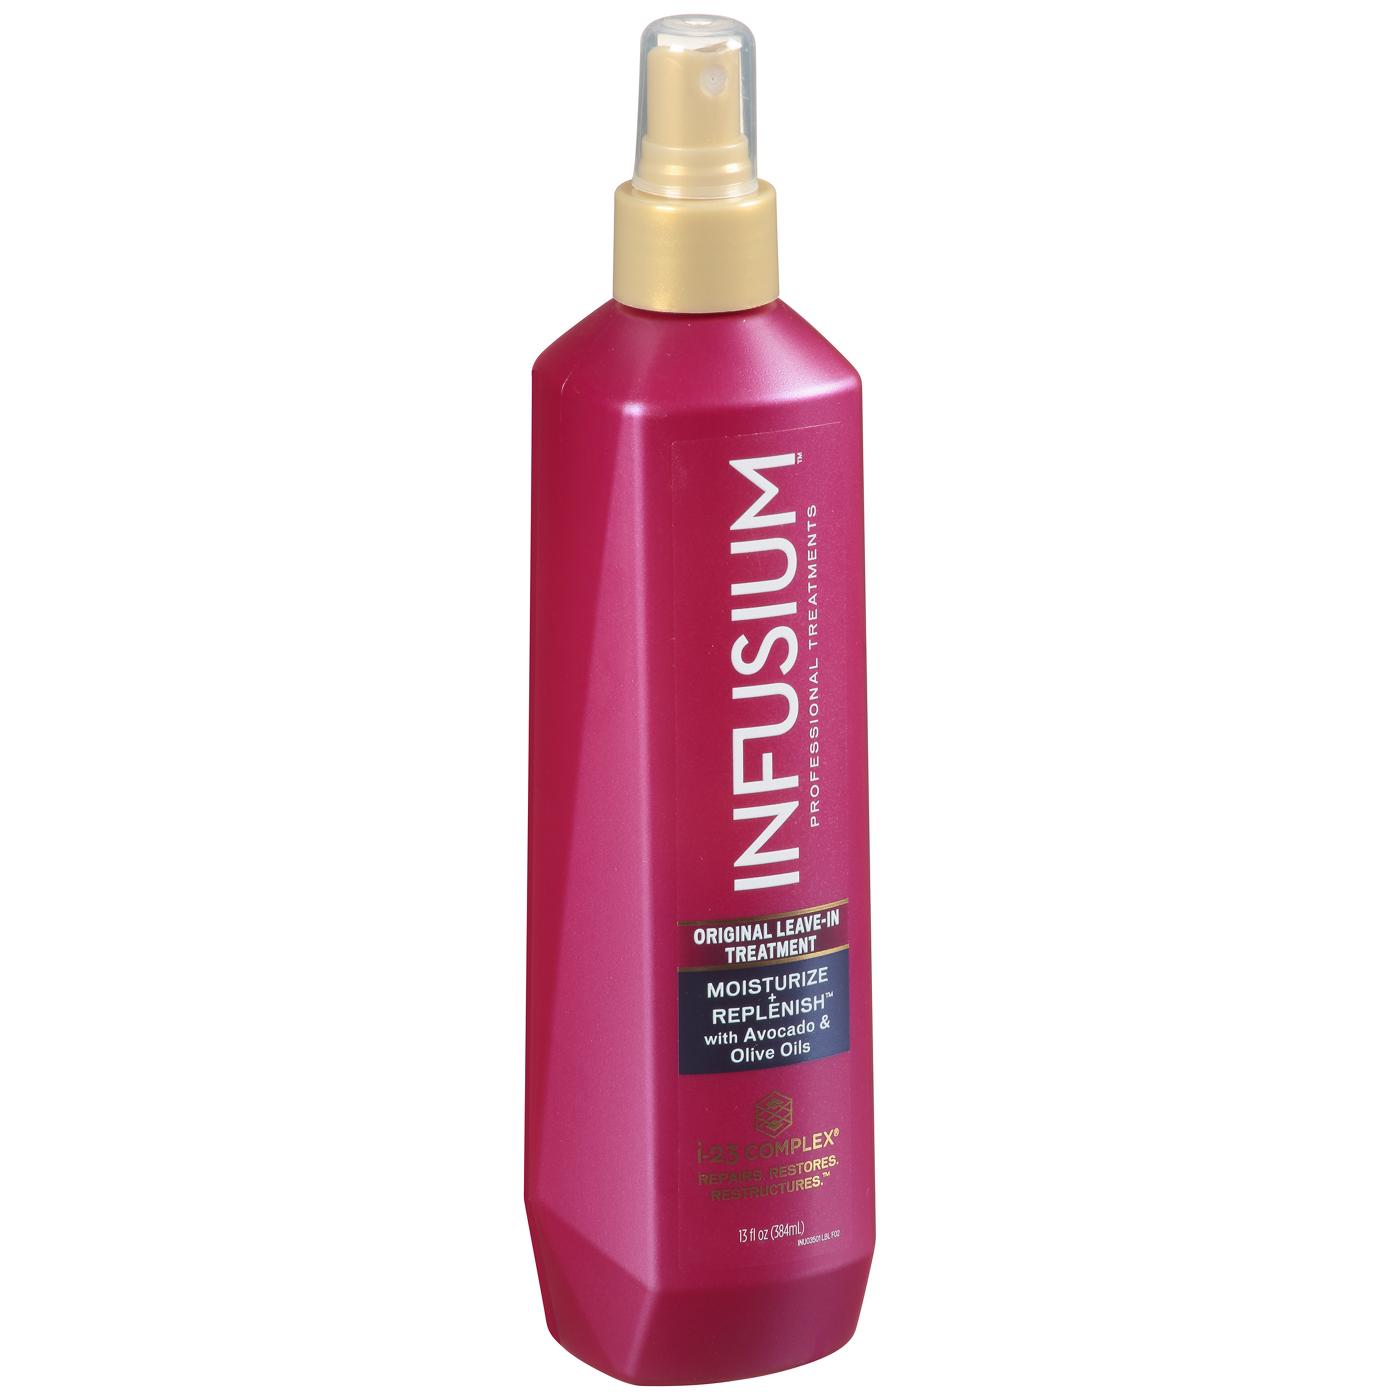 Infusium 23 Leave In Treatment Moisturize And Replenish Spray; image 2 of 2